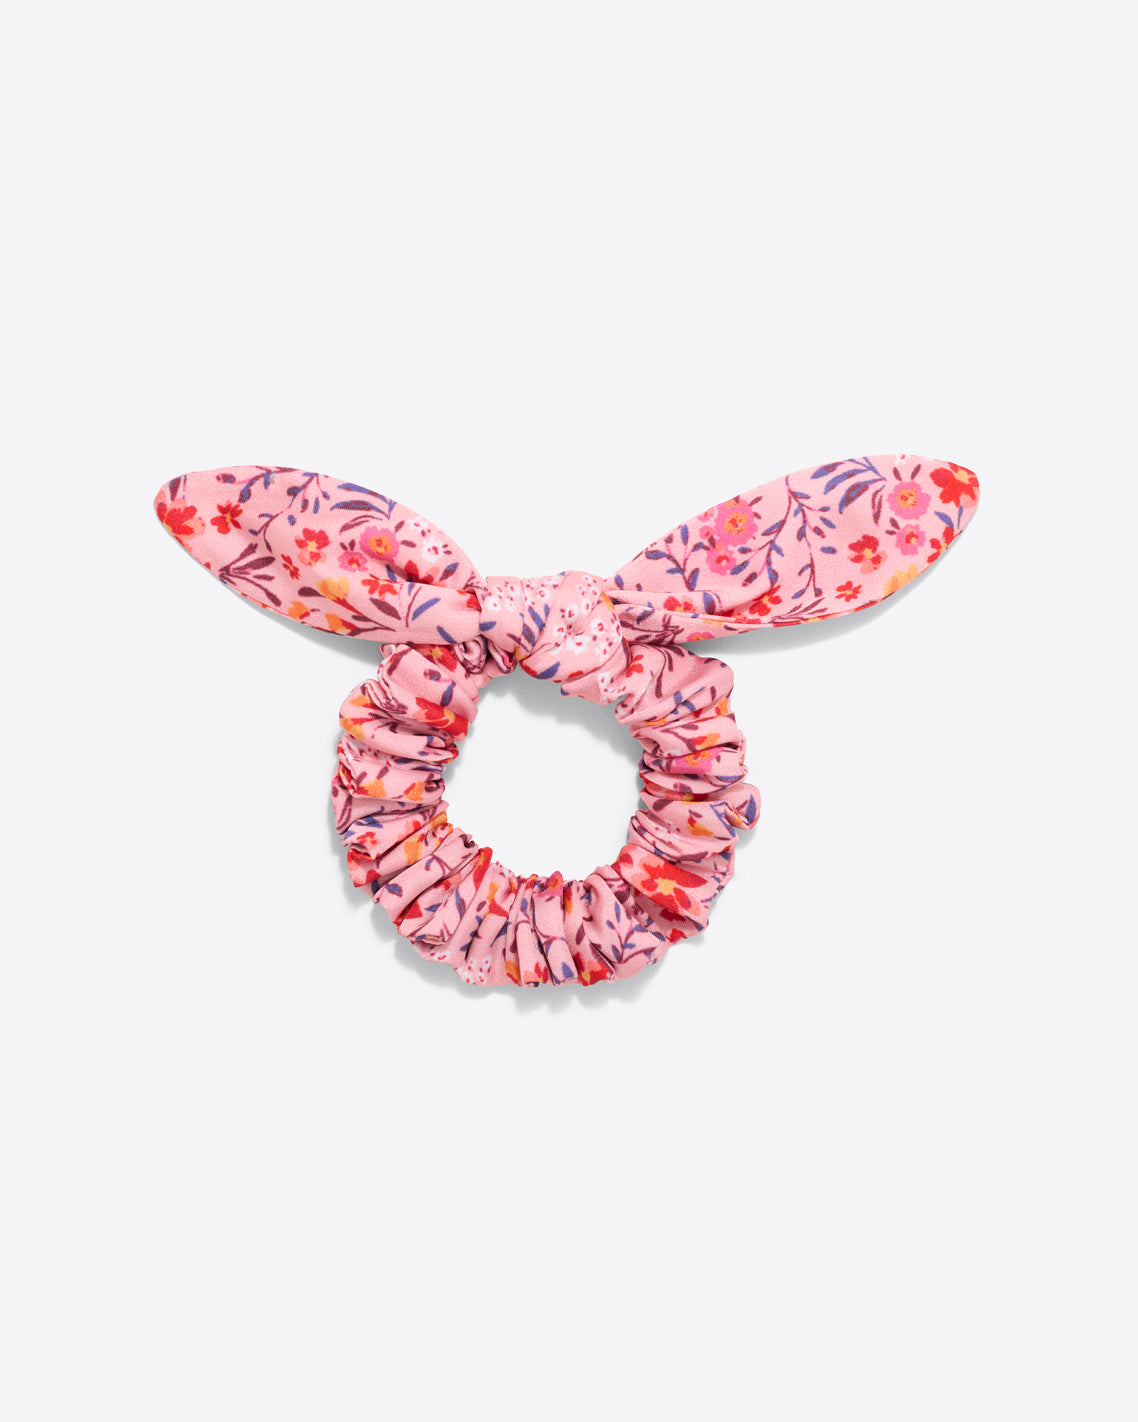 Knot Scrunchie in Pansy Floral